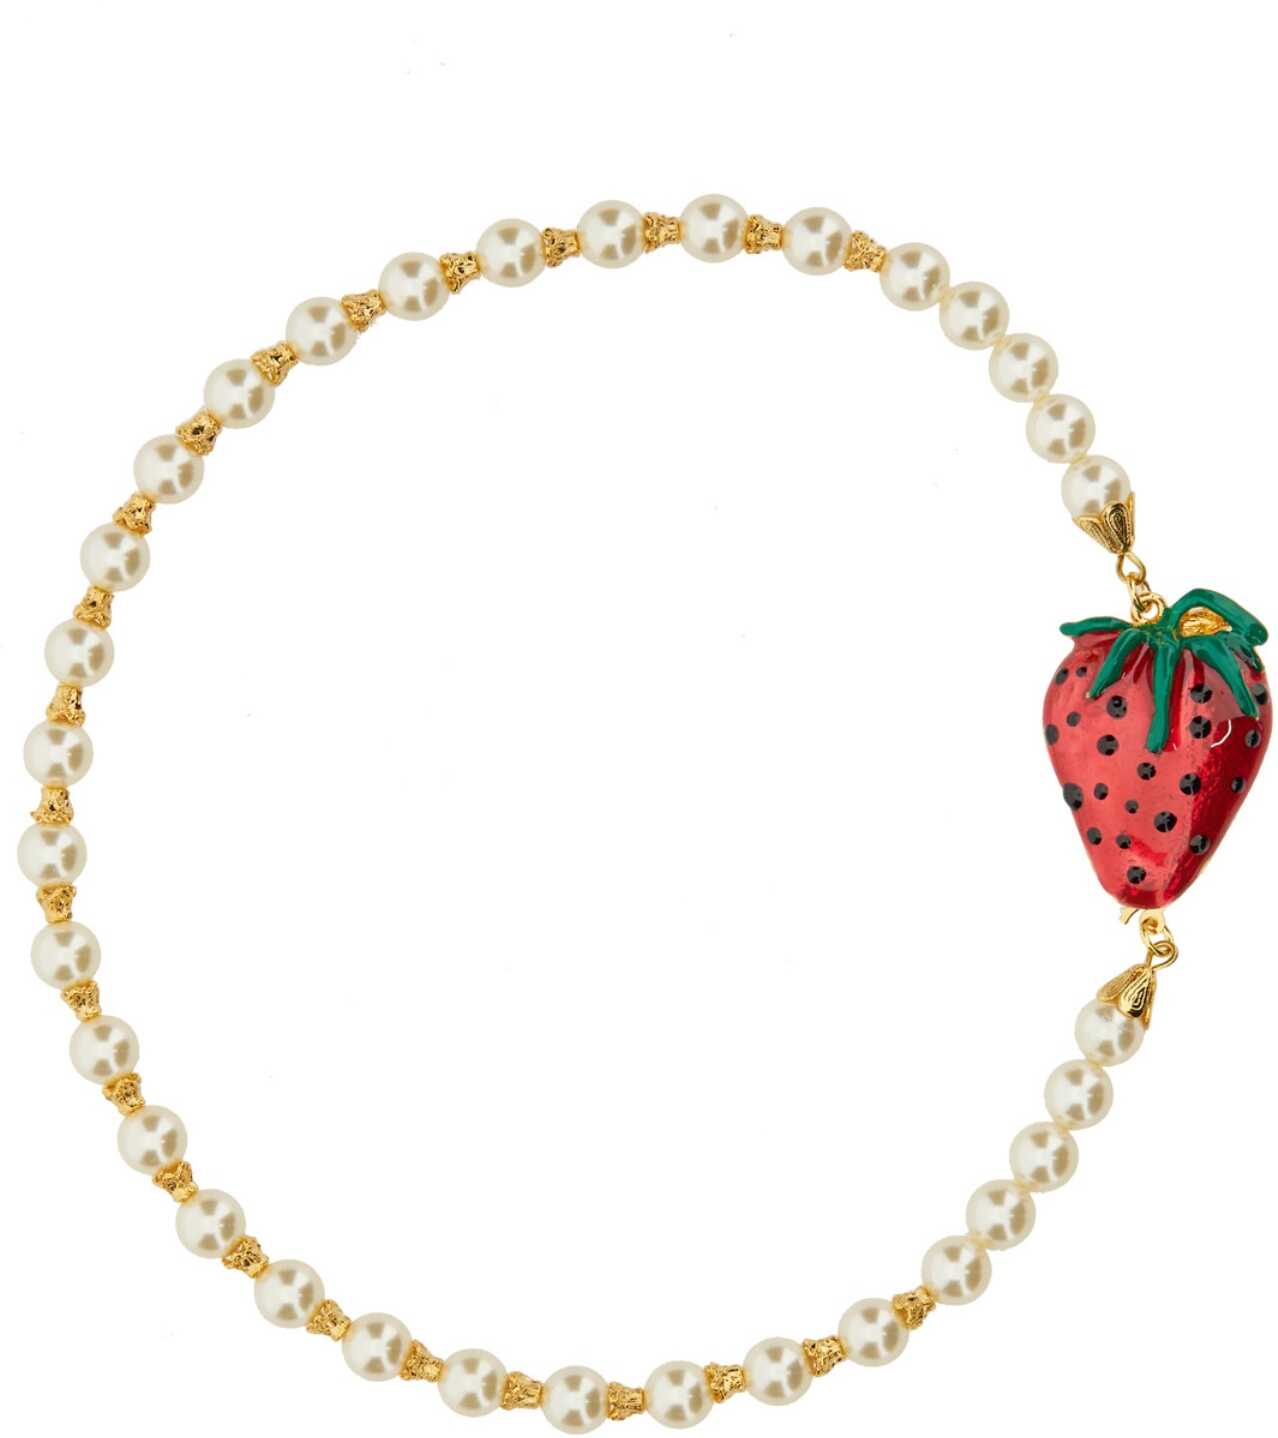 Alessandra Rich Pearl Necklace With Strawberry Decoration MULTICOLOUR image0